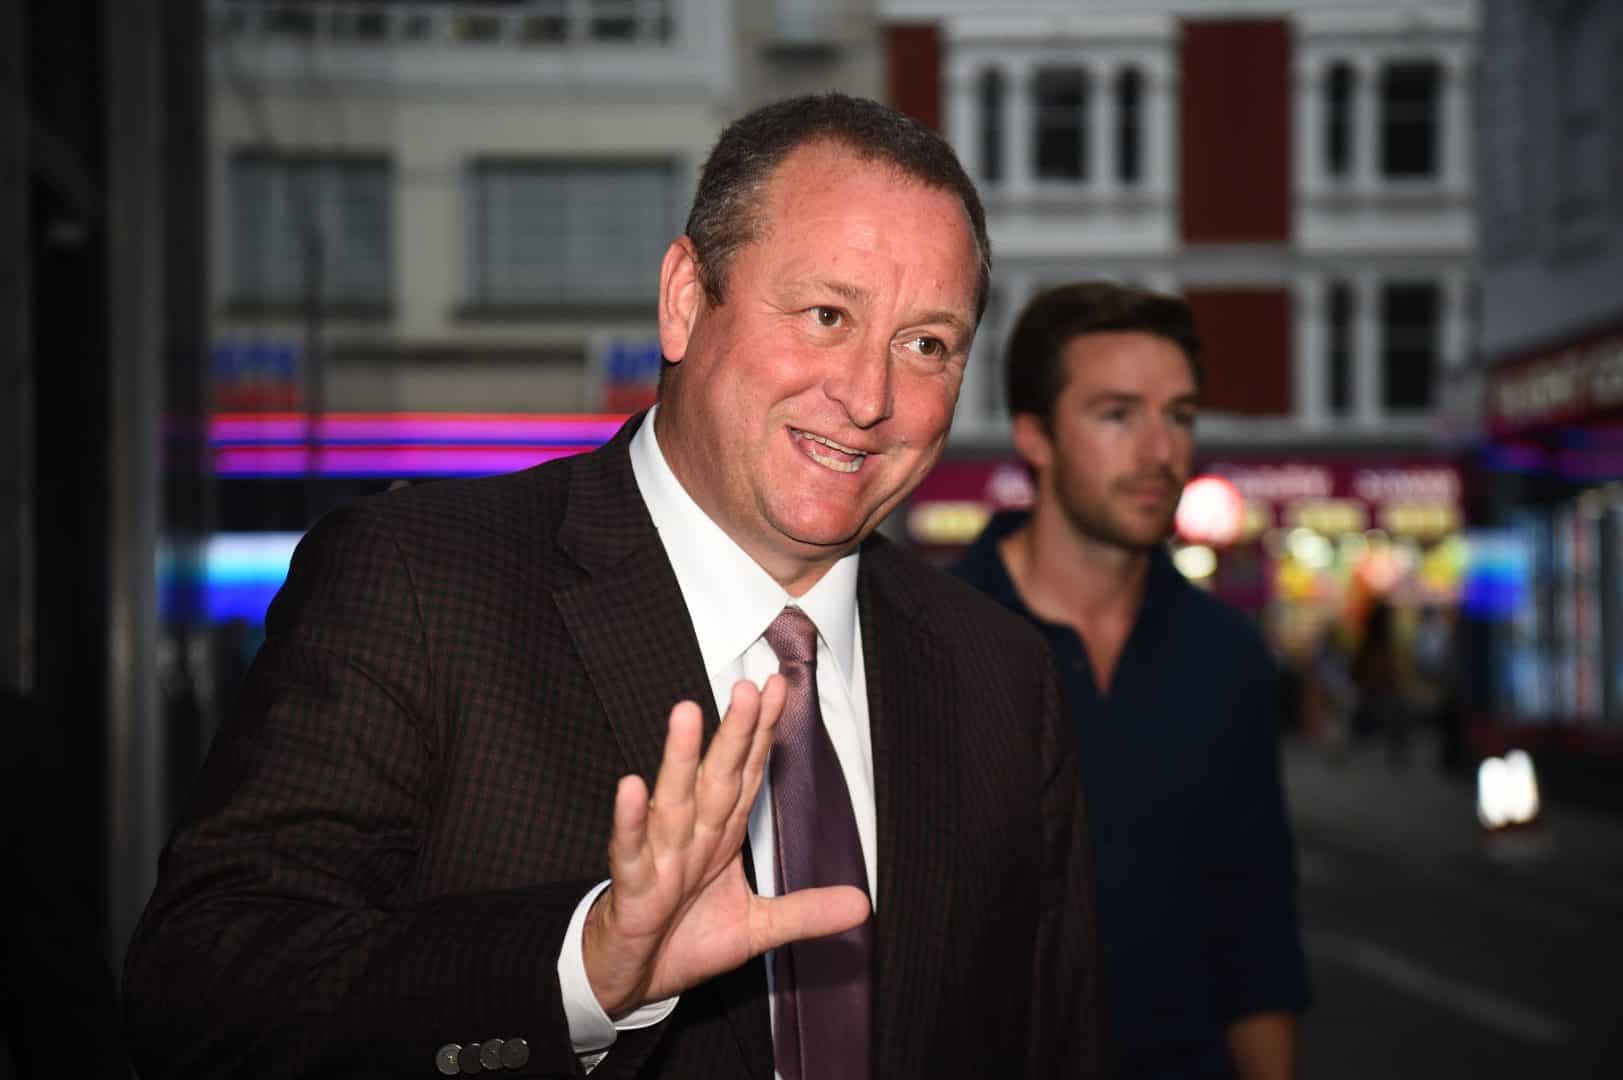 Mike Ashley apologises to Government over ‘ill-judged’ virus response